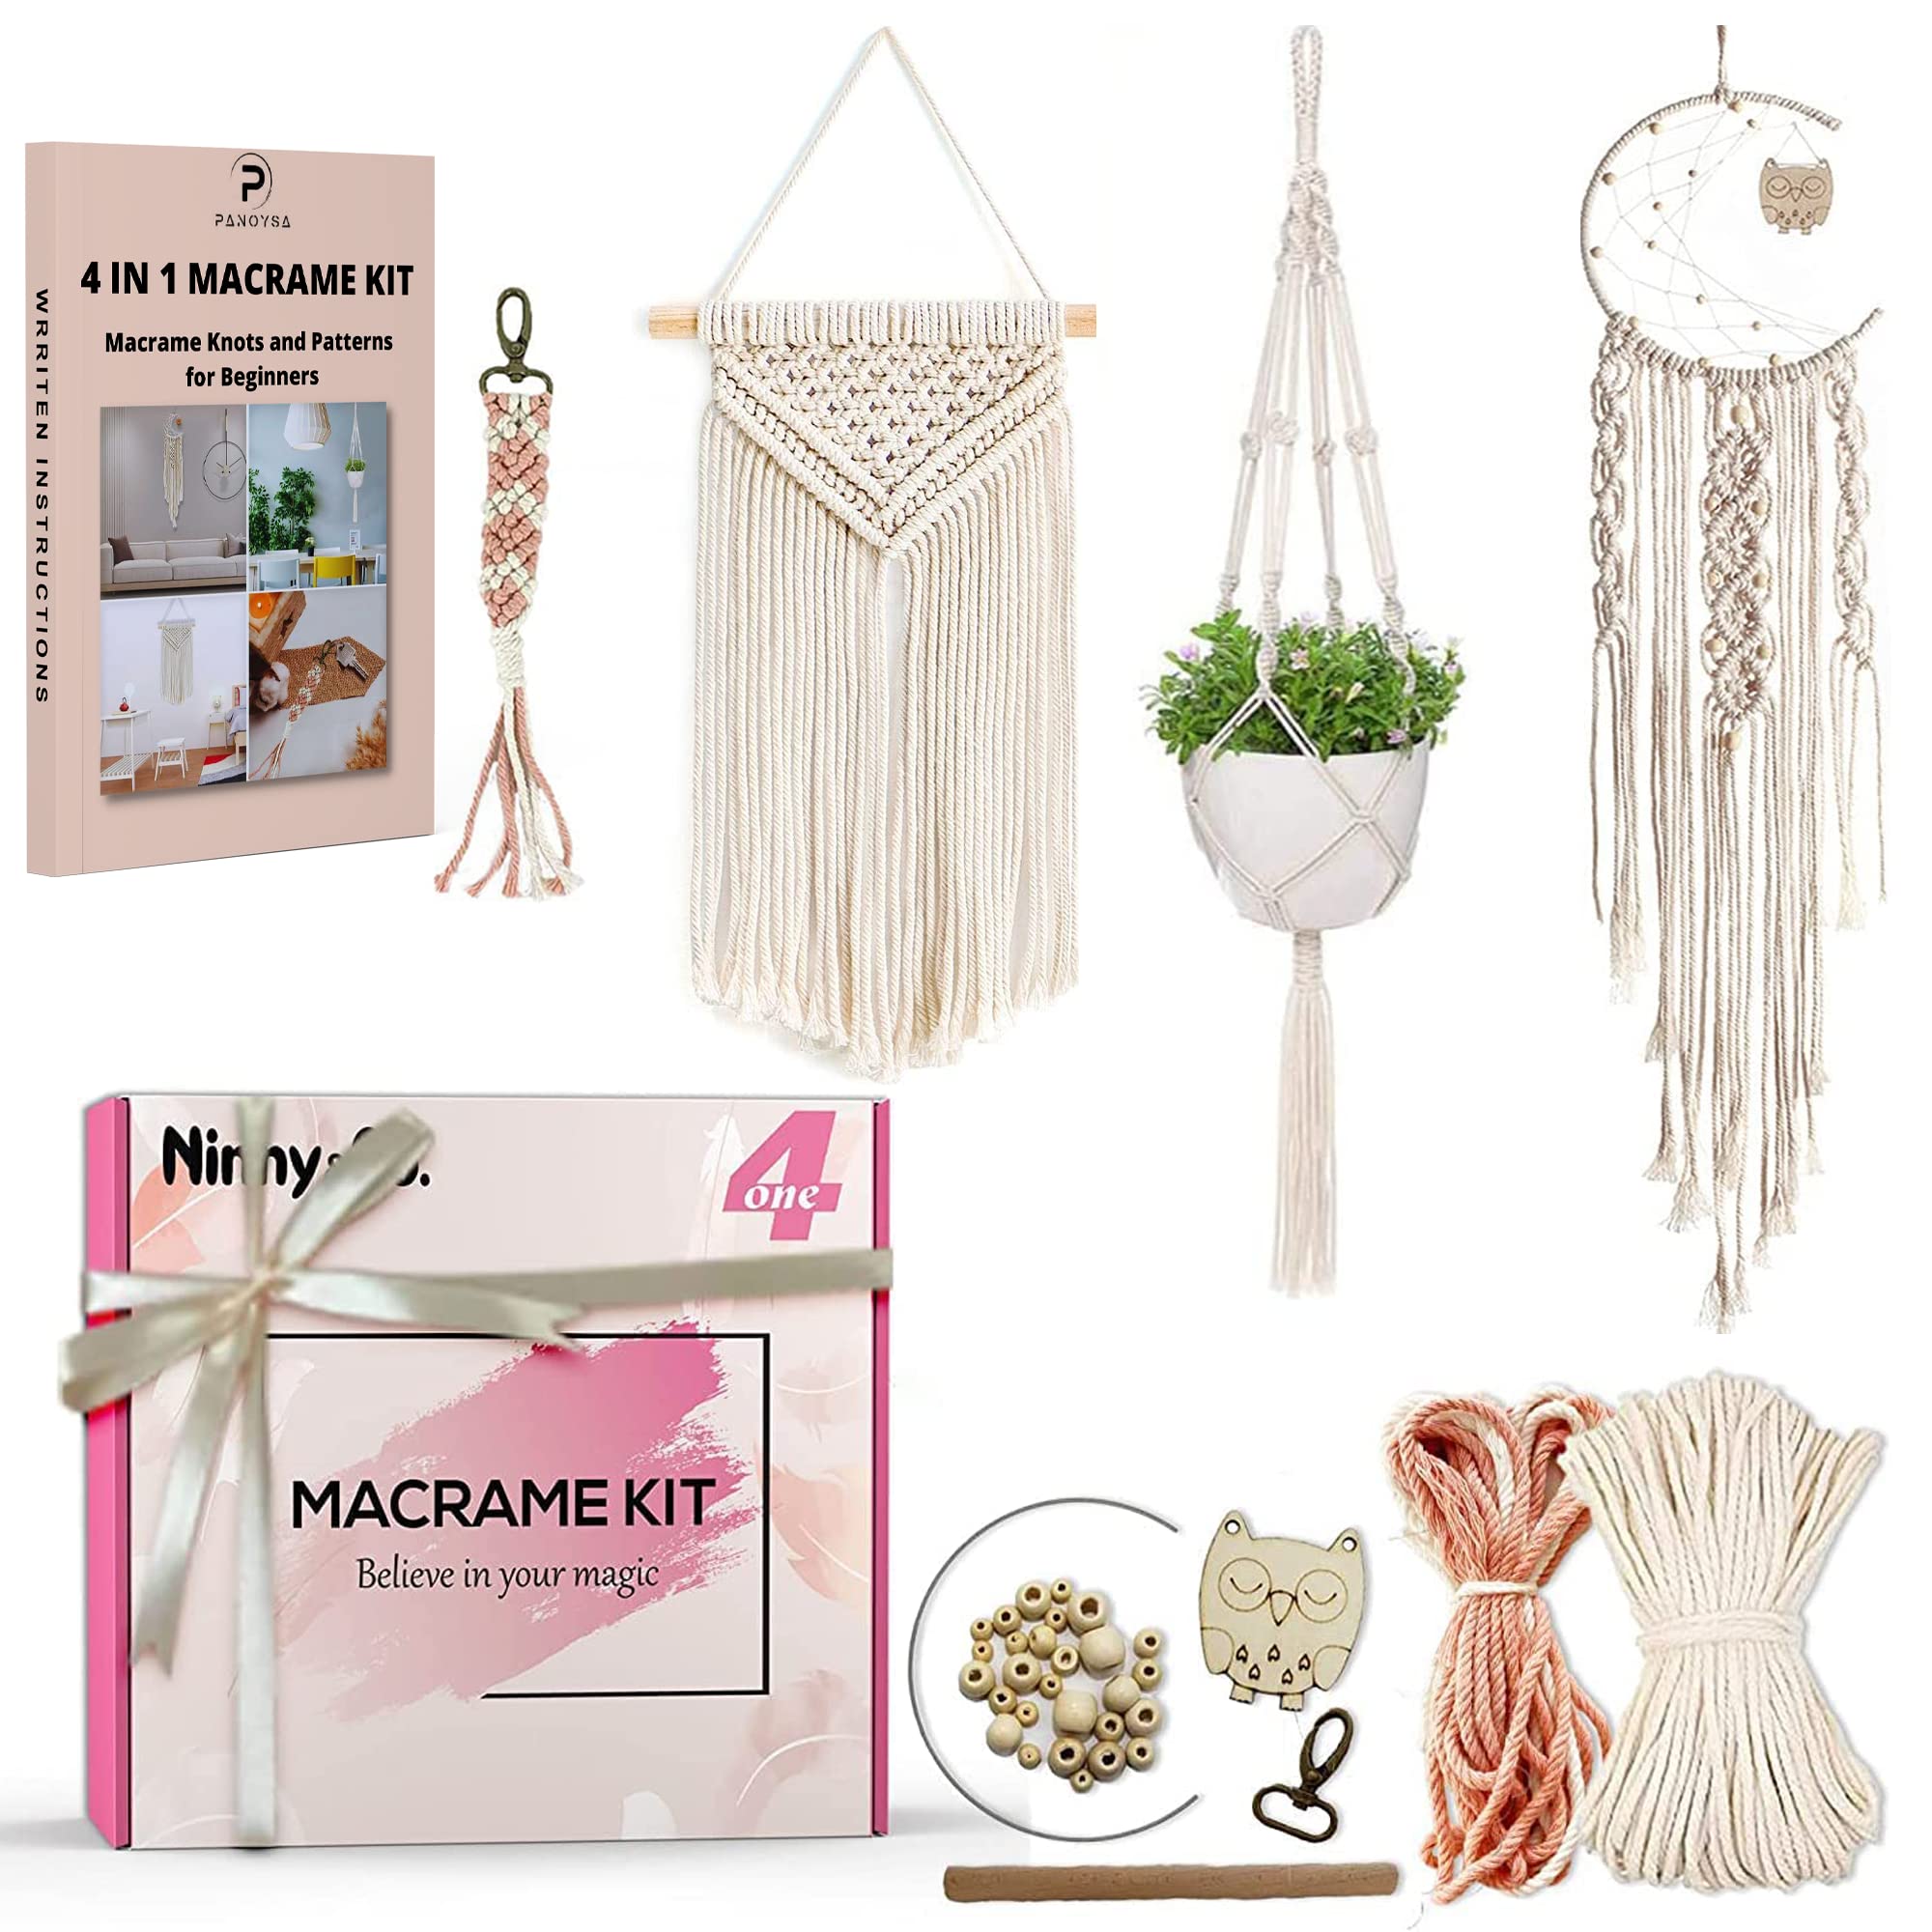 DIY Macrame Kit for Beginners by I HEART KITS – Makes 3 Projects: 1 Macrame  Plant Hanger, 1 Macrame Keychain & 1 Macrame Wall Hanging, Includes Cotton